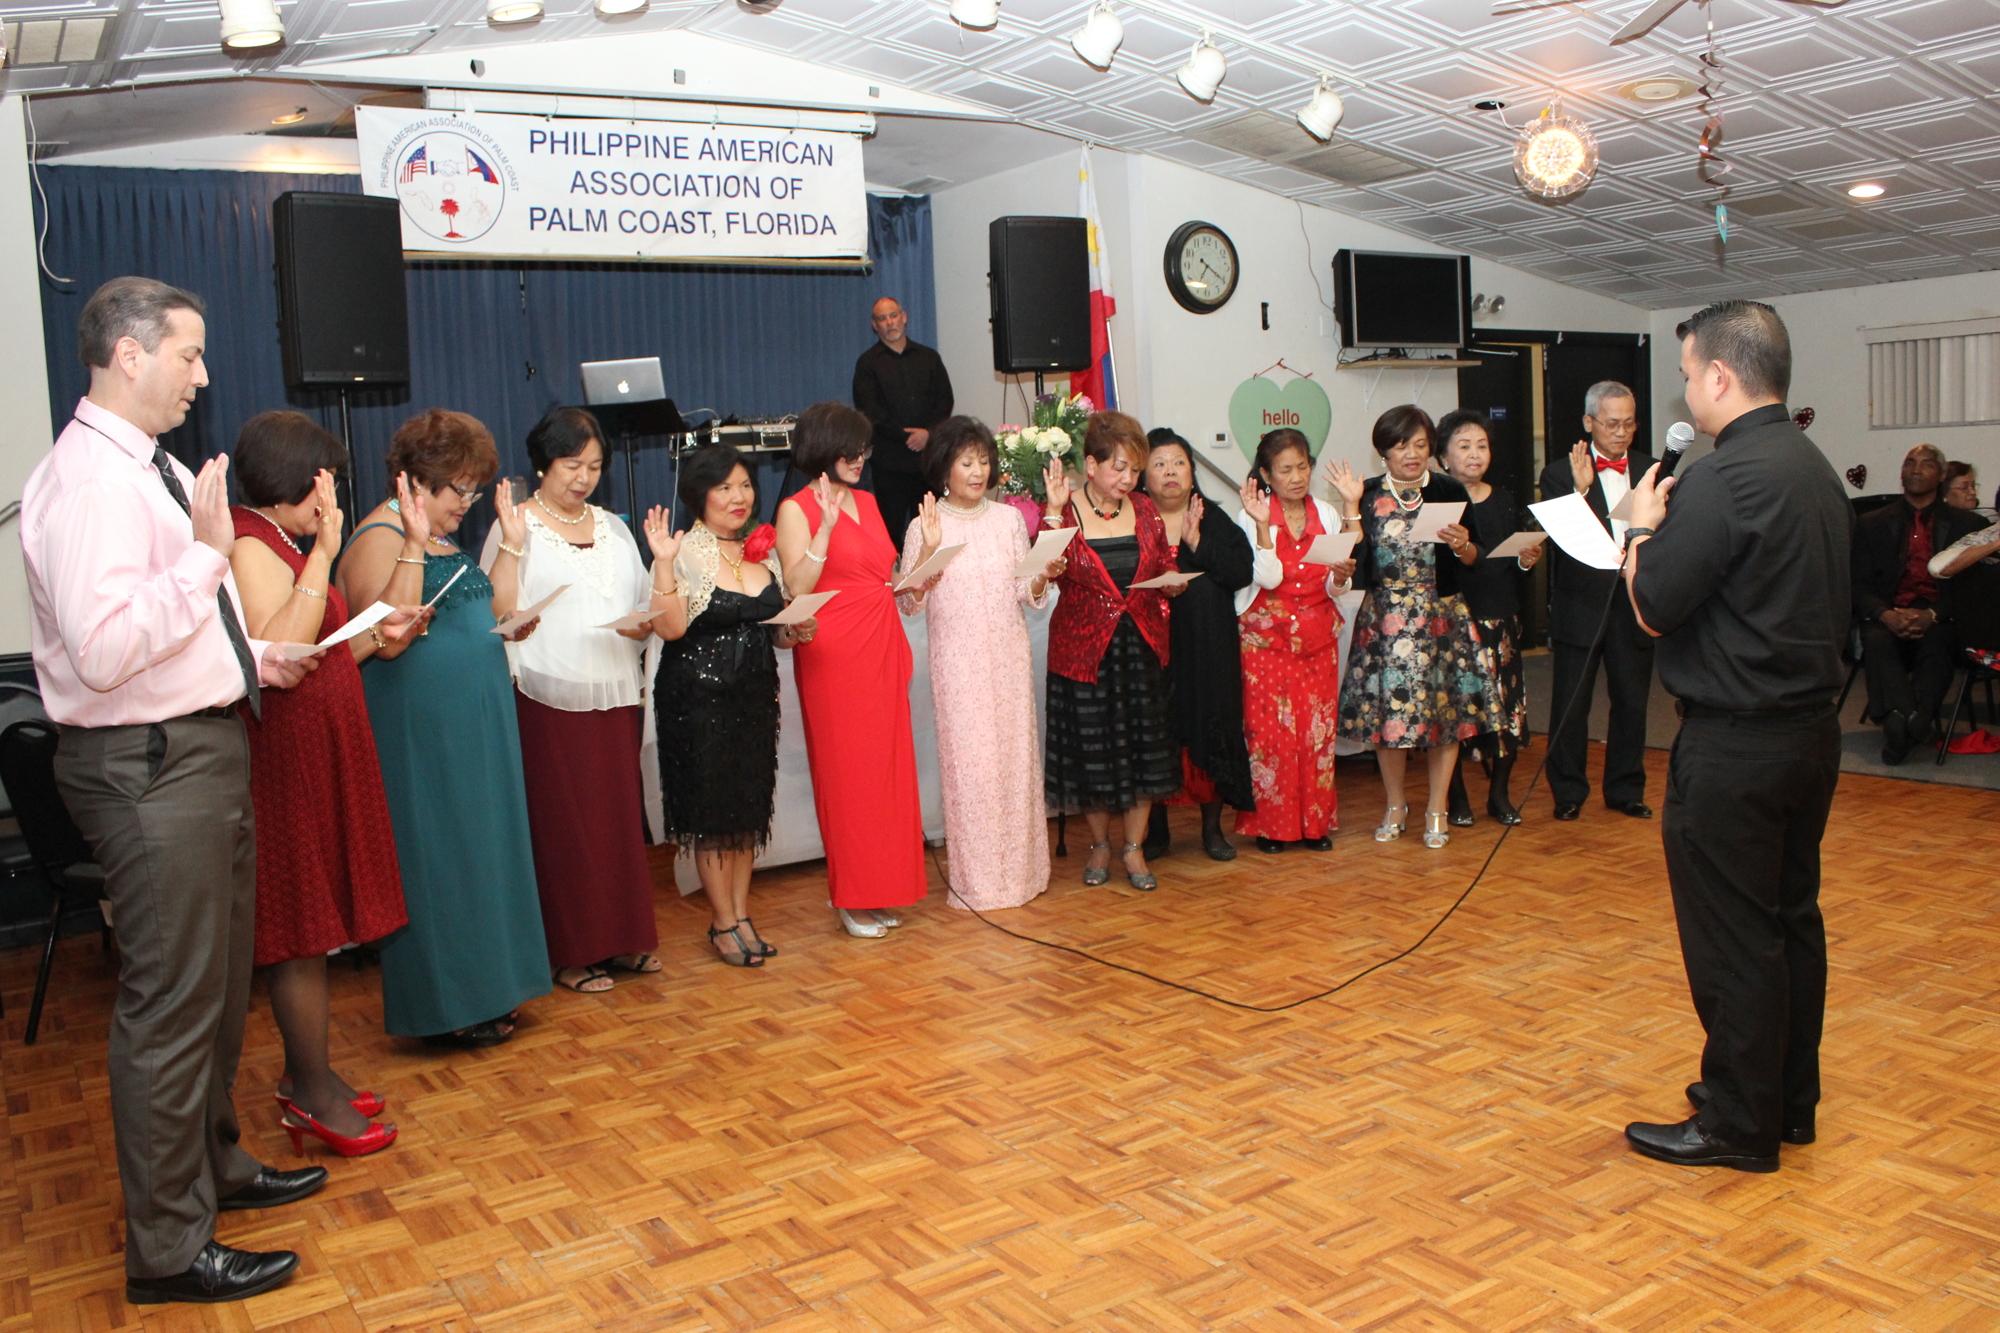 Philippine American Association of Palm Coast's new administrations officers and board members get inducted. Photo courtesy of William Zuza